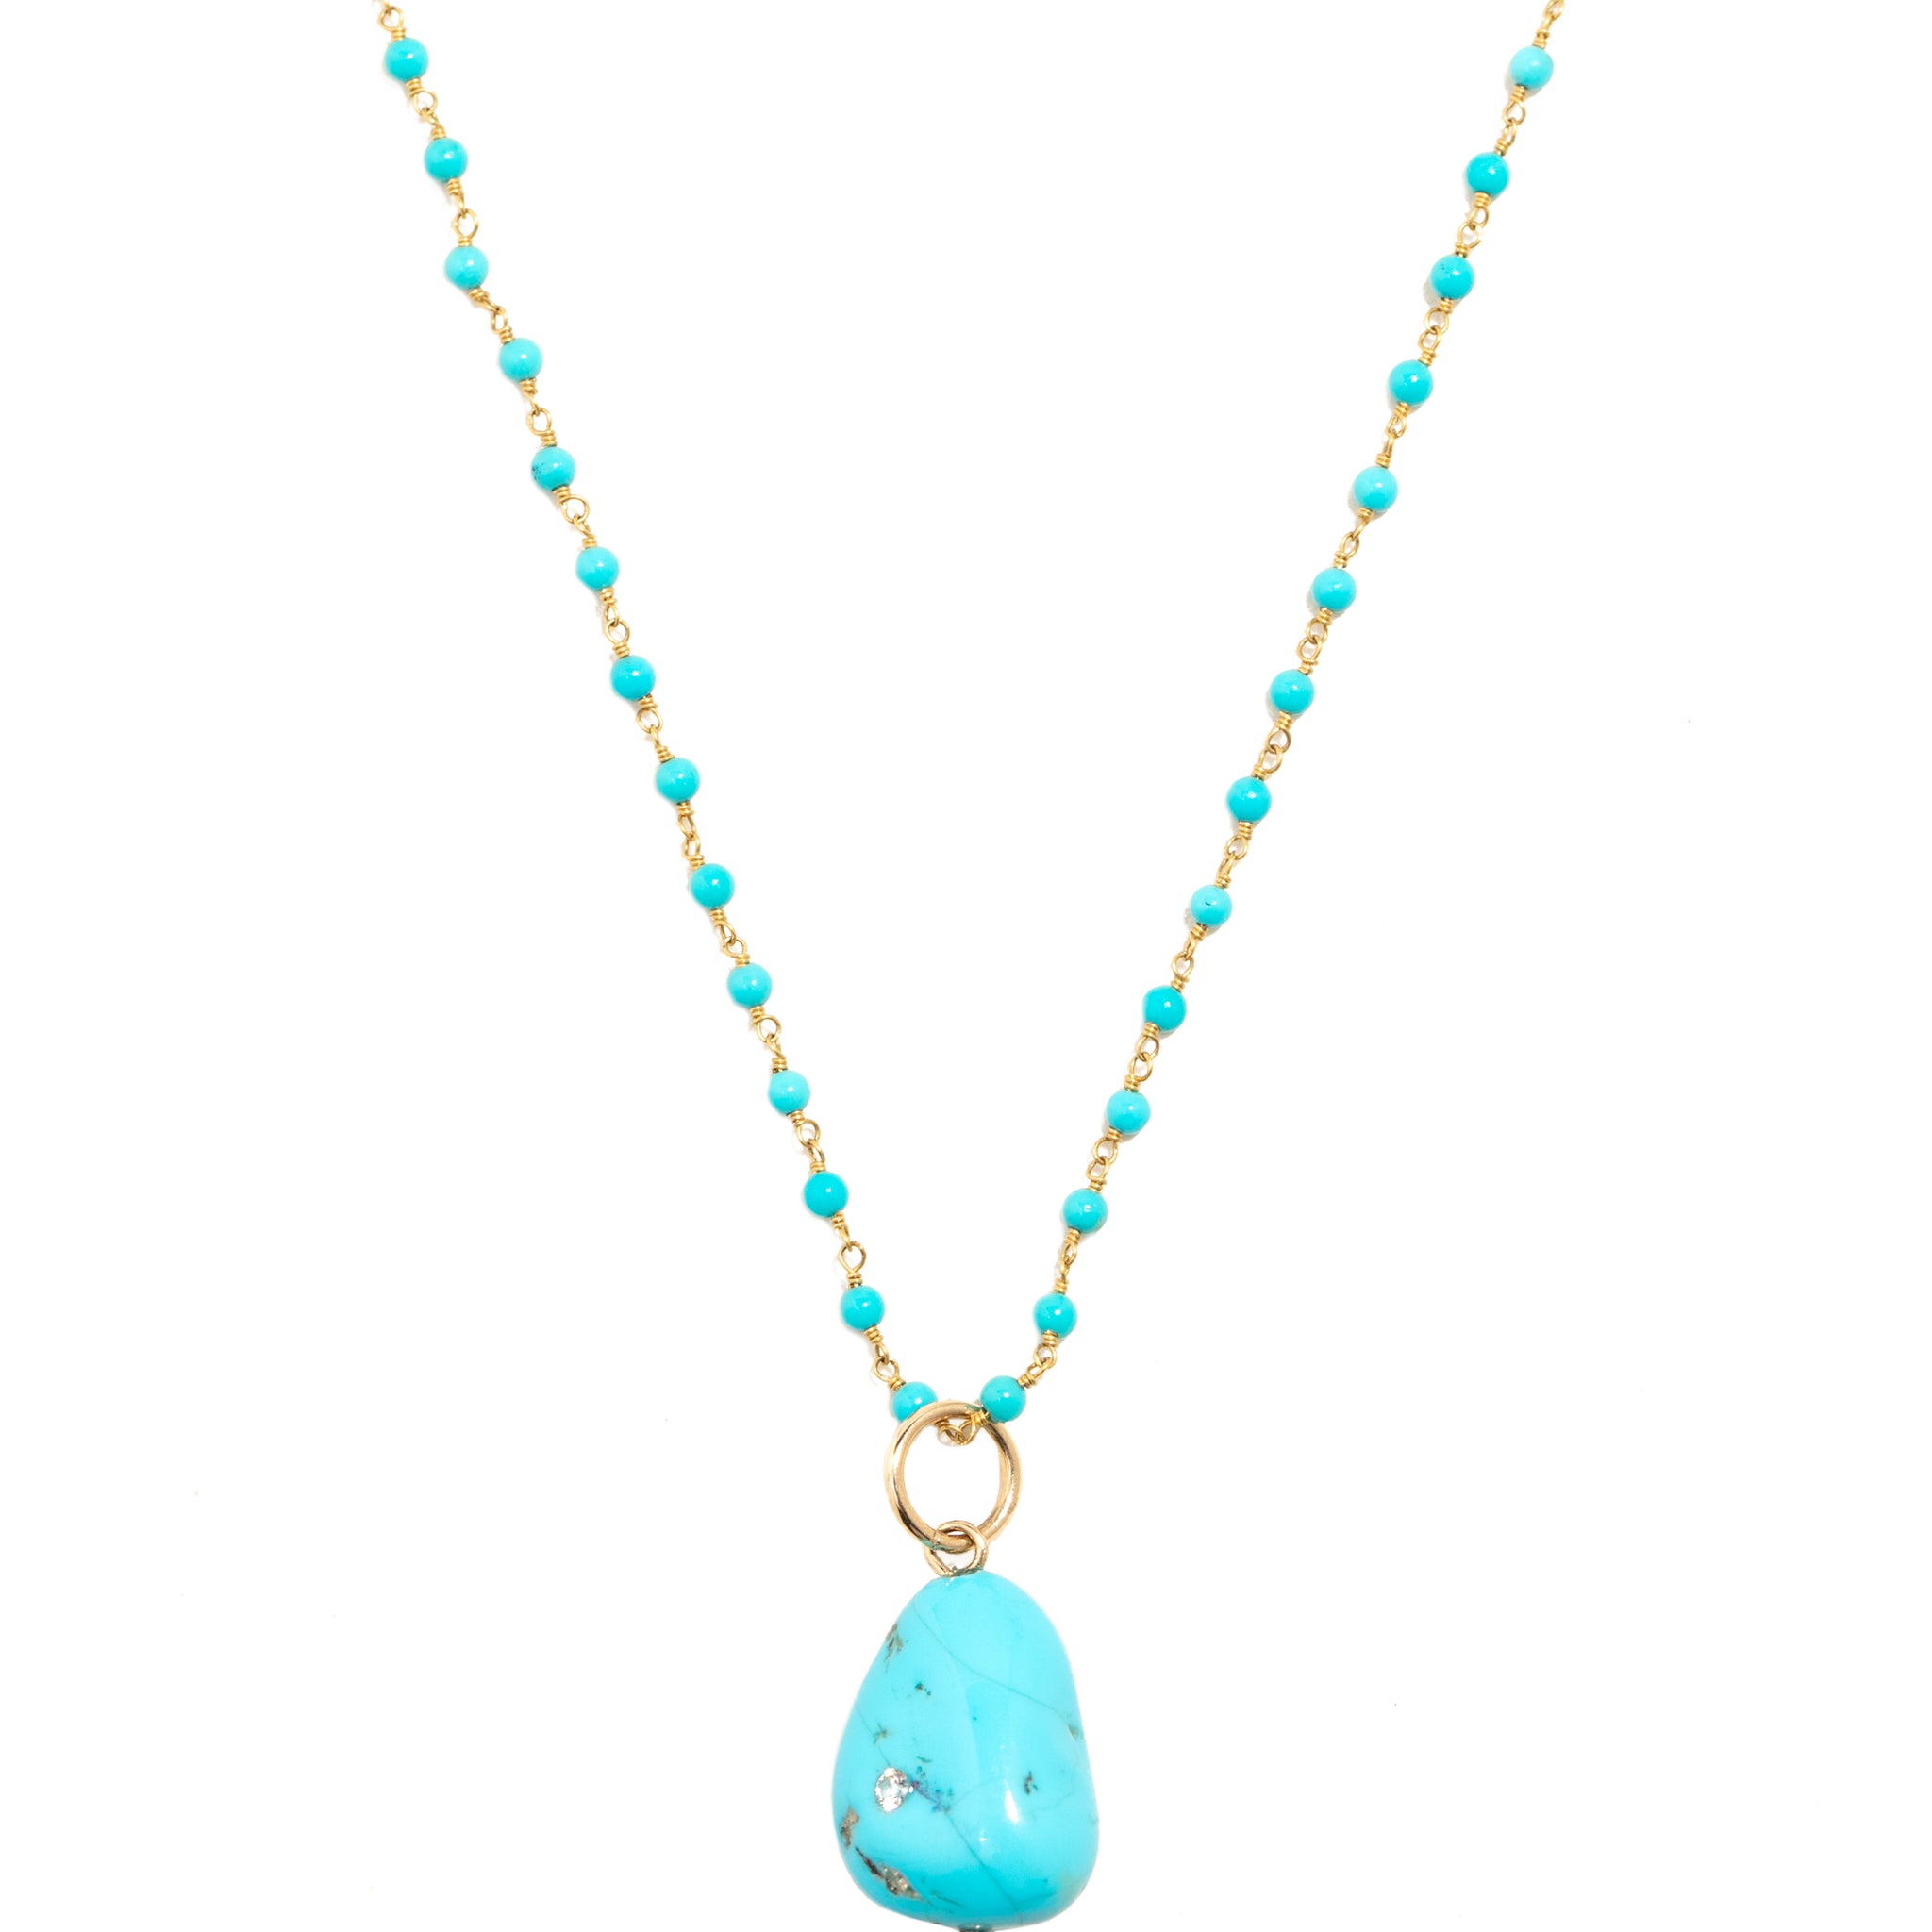 L.A. STEIN Sleeping Beauty Turquoise Nugget Necklace with Diamond